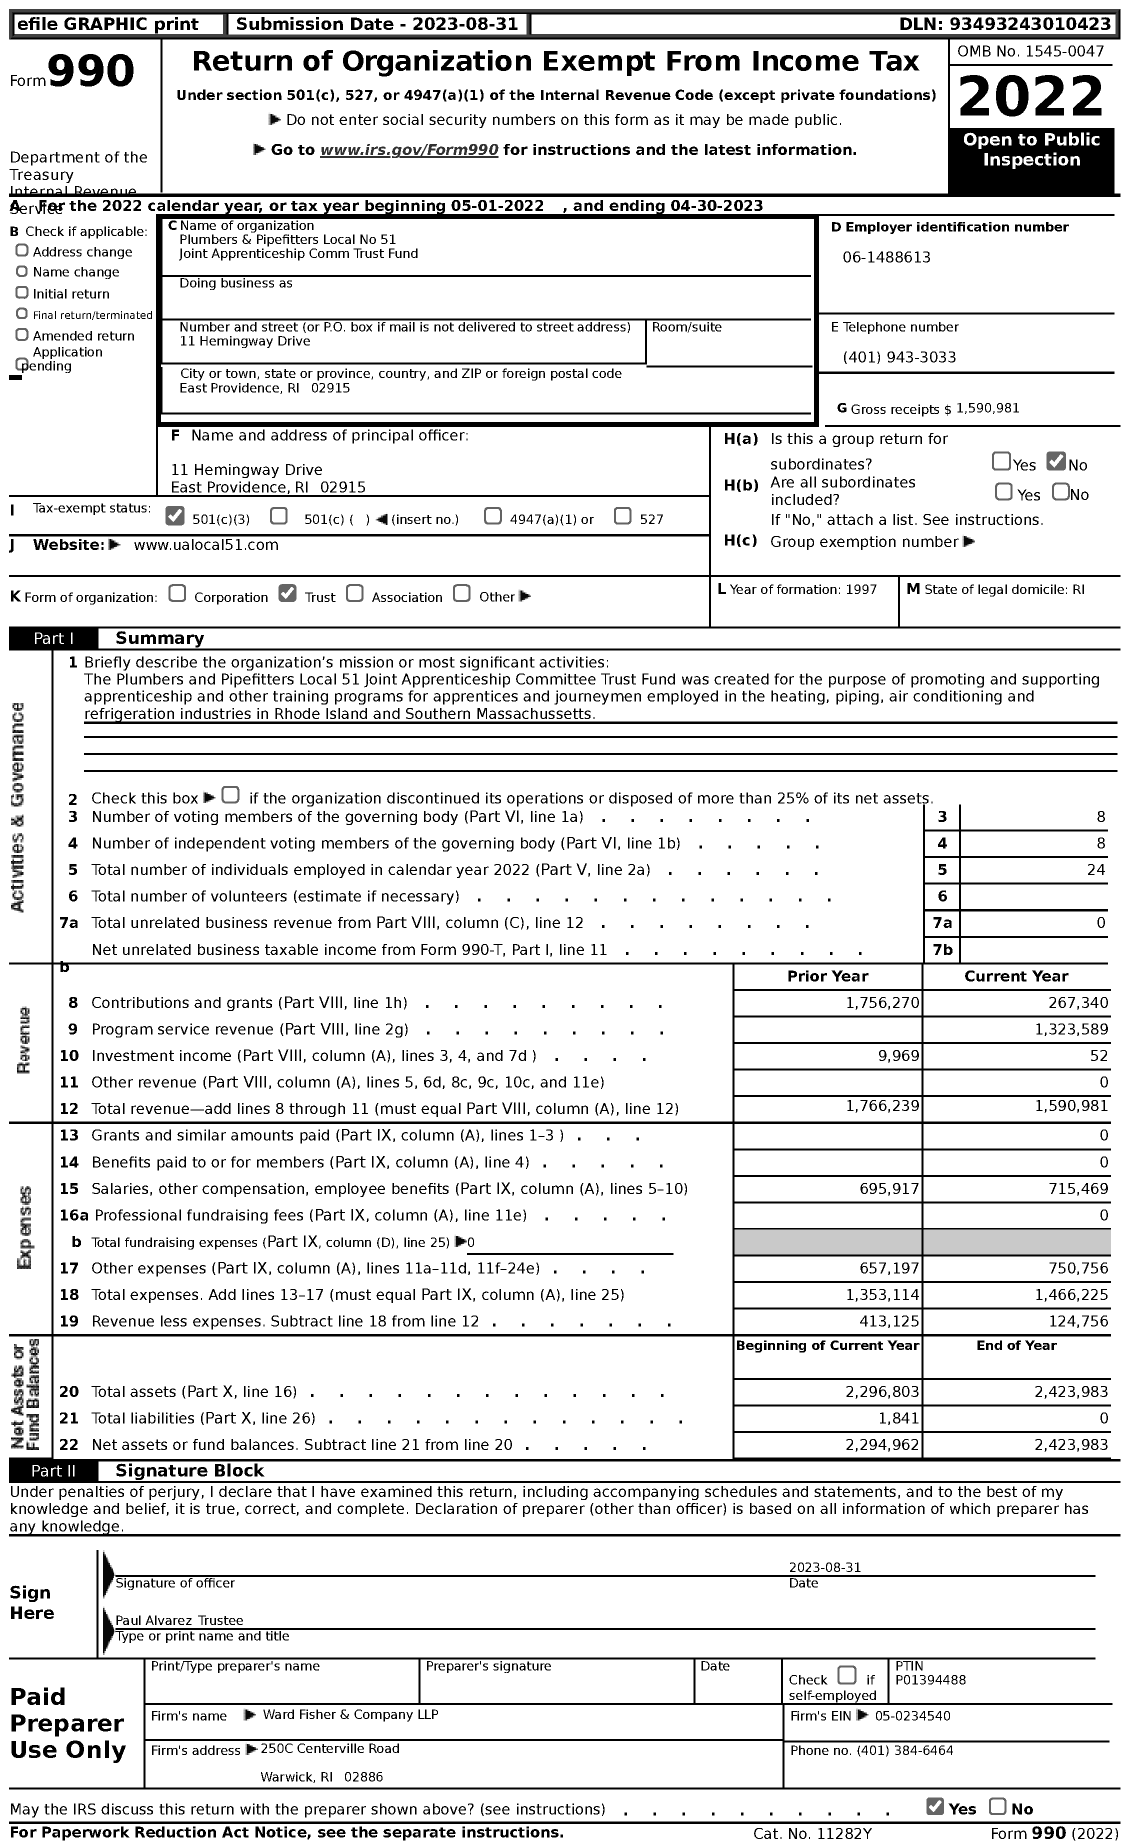 Image of first page of 2022 Form 990 for Plumbers & Pipefitters Local No 51 Joint Apprenticeship Comm Trust Fund